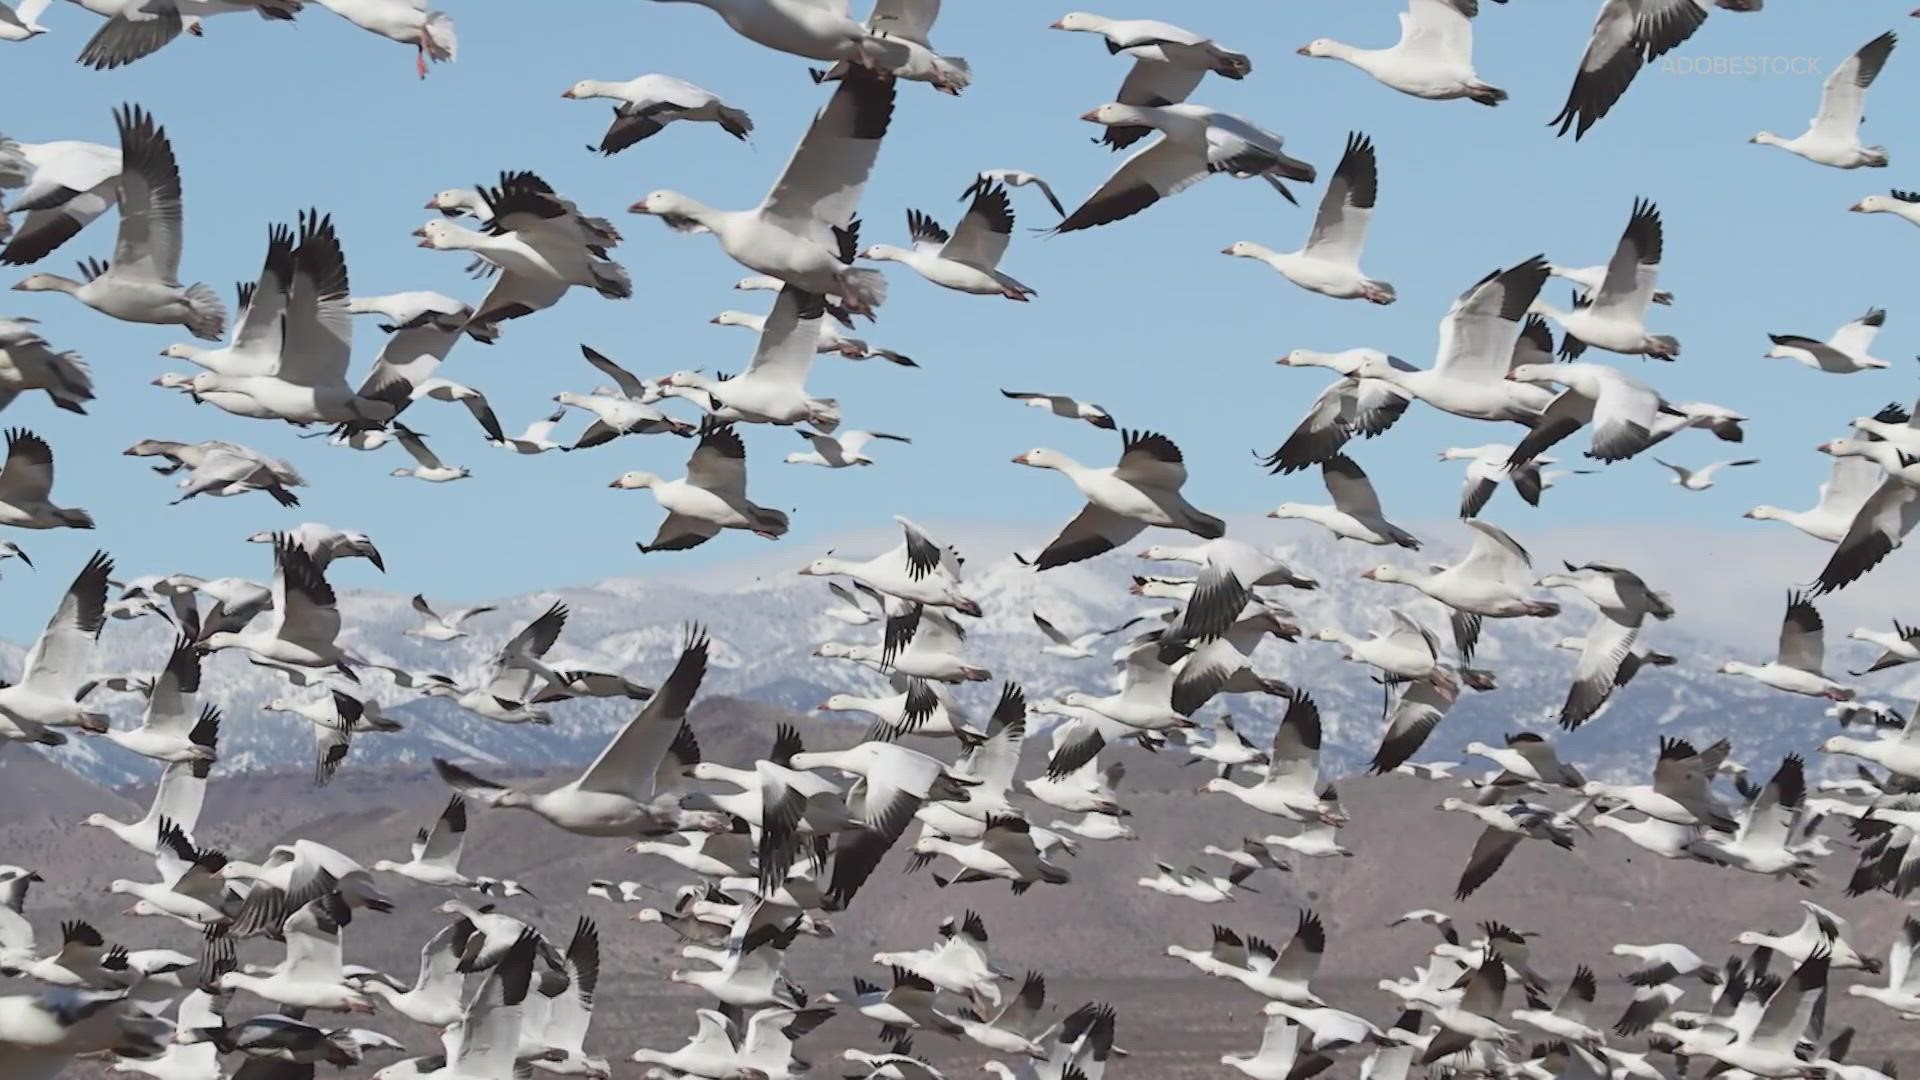 The Washington Department of Fish and Wildfire said waterfowl hunting season, which includes snow geese, was open as of late January.